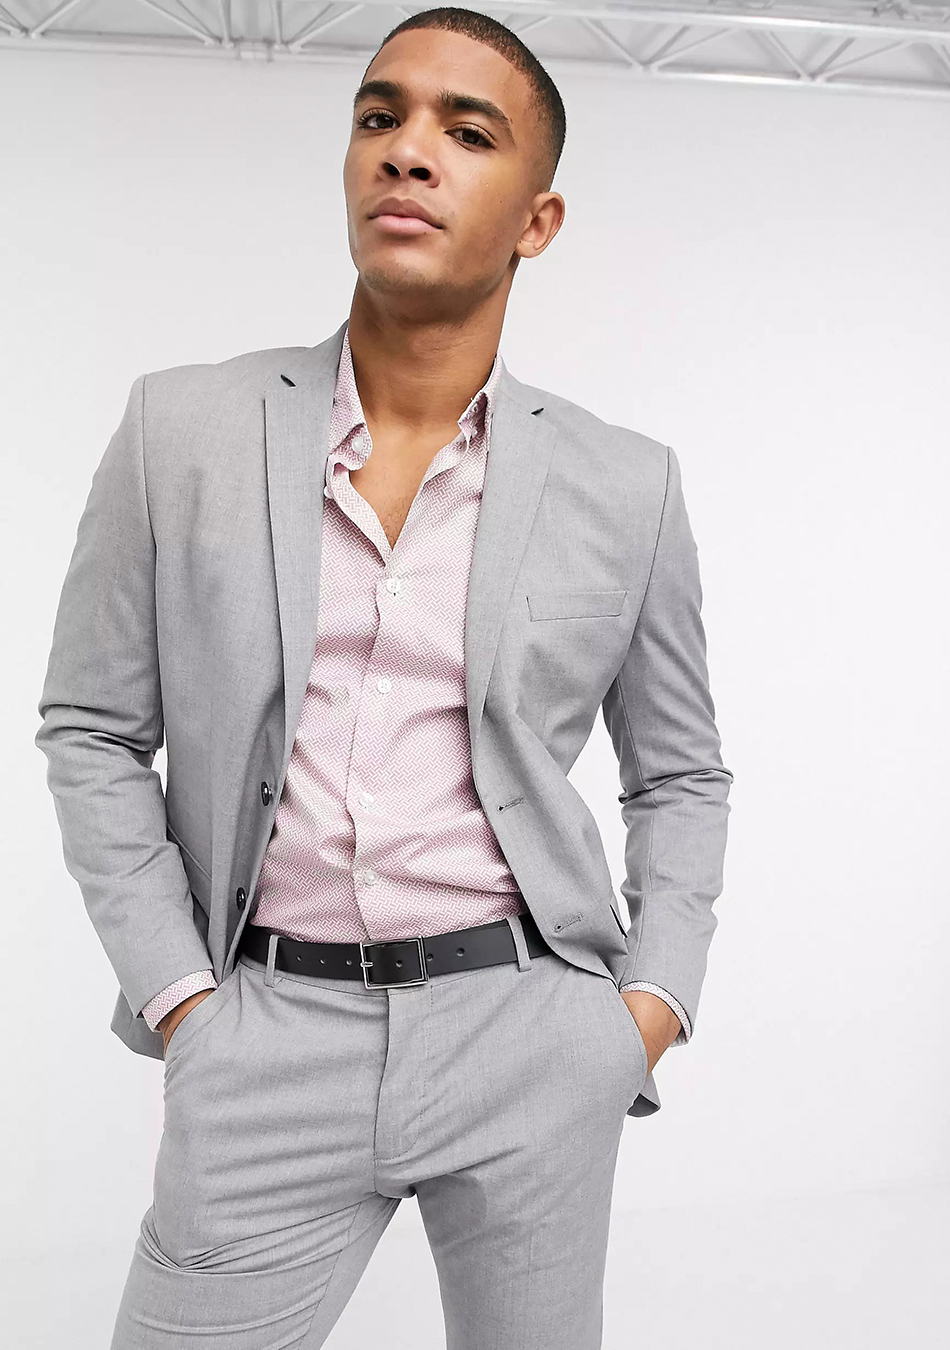 Wearing a light-grey suit with a light pink herringbone pattern shirt